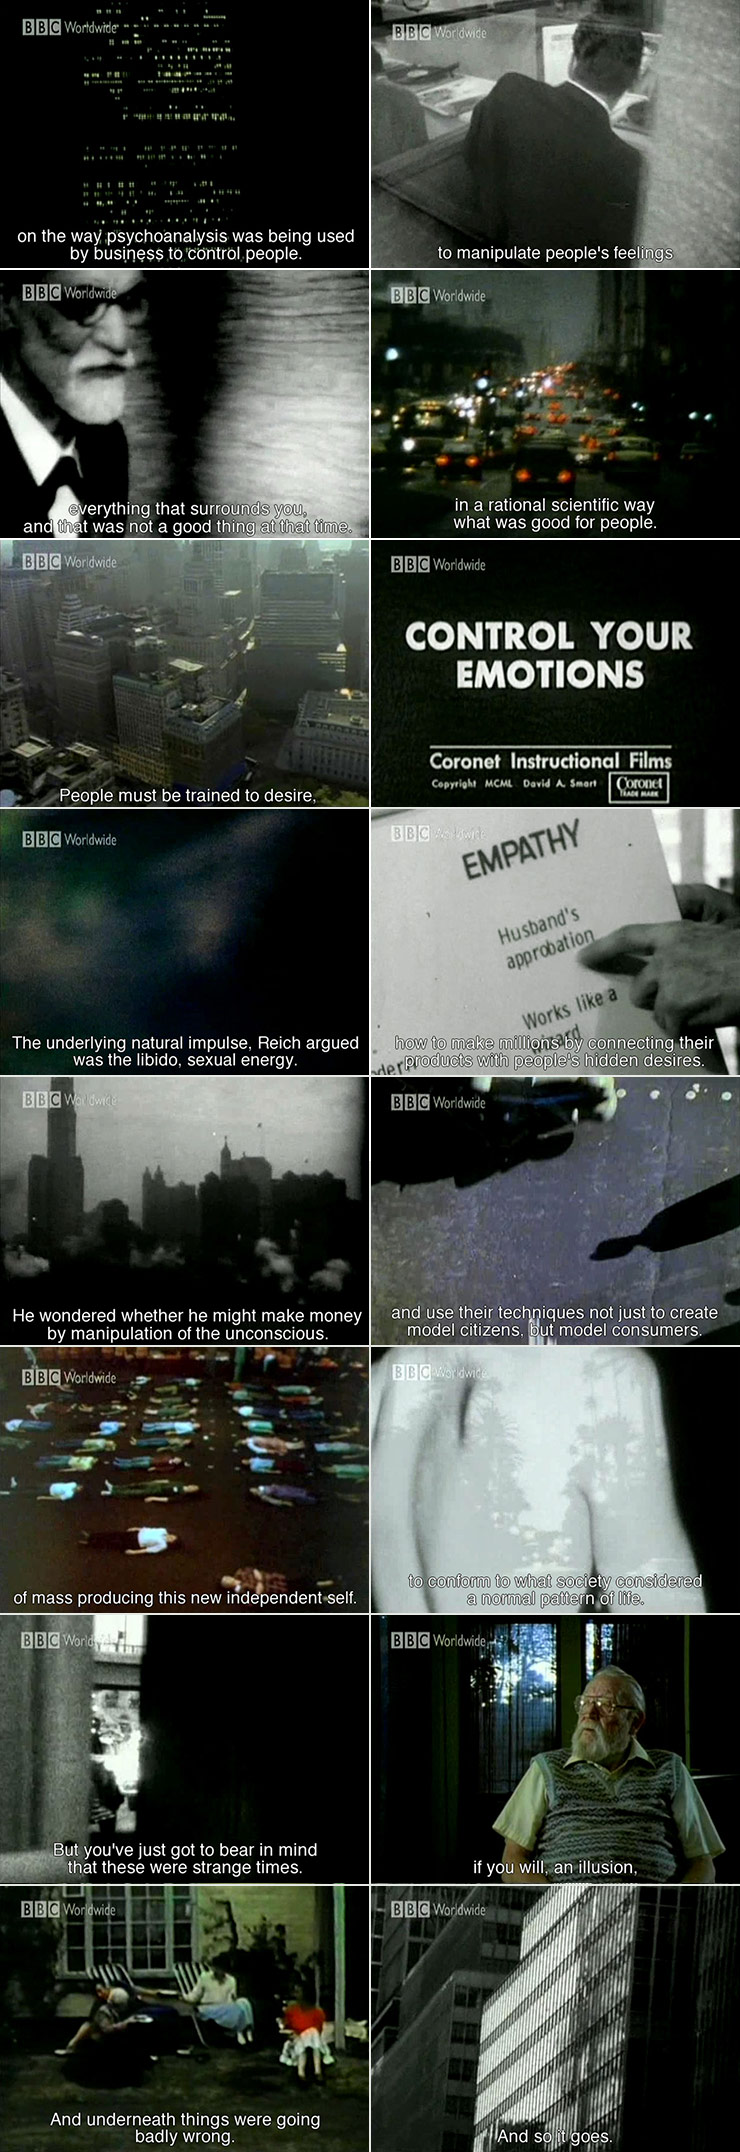 The Century of the Self – BBC Documentary by Adam Curtis, 2002